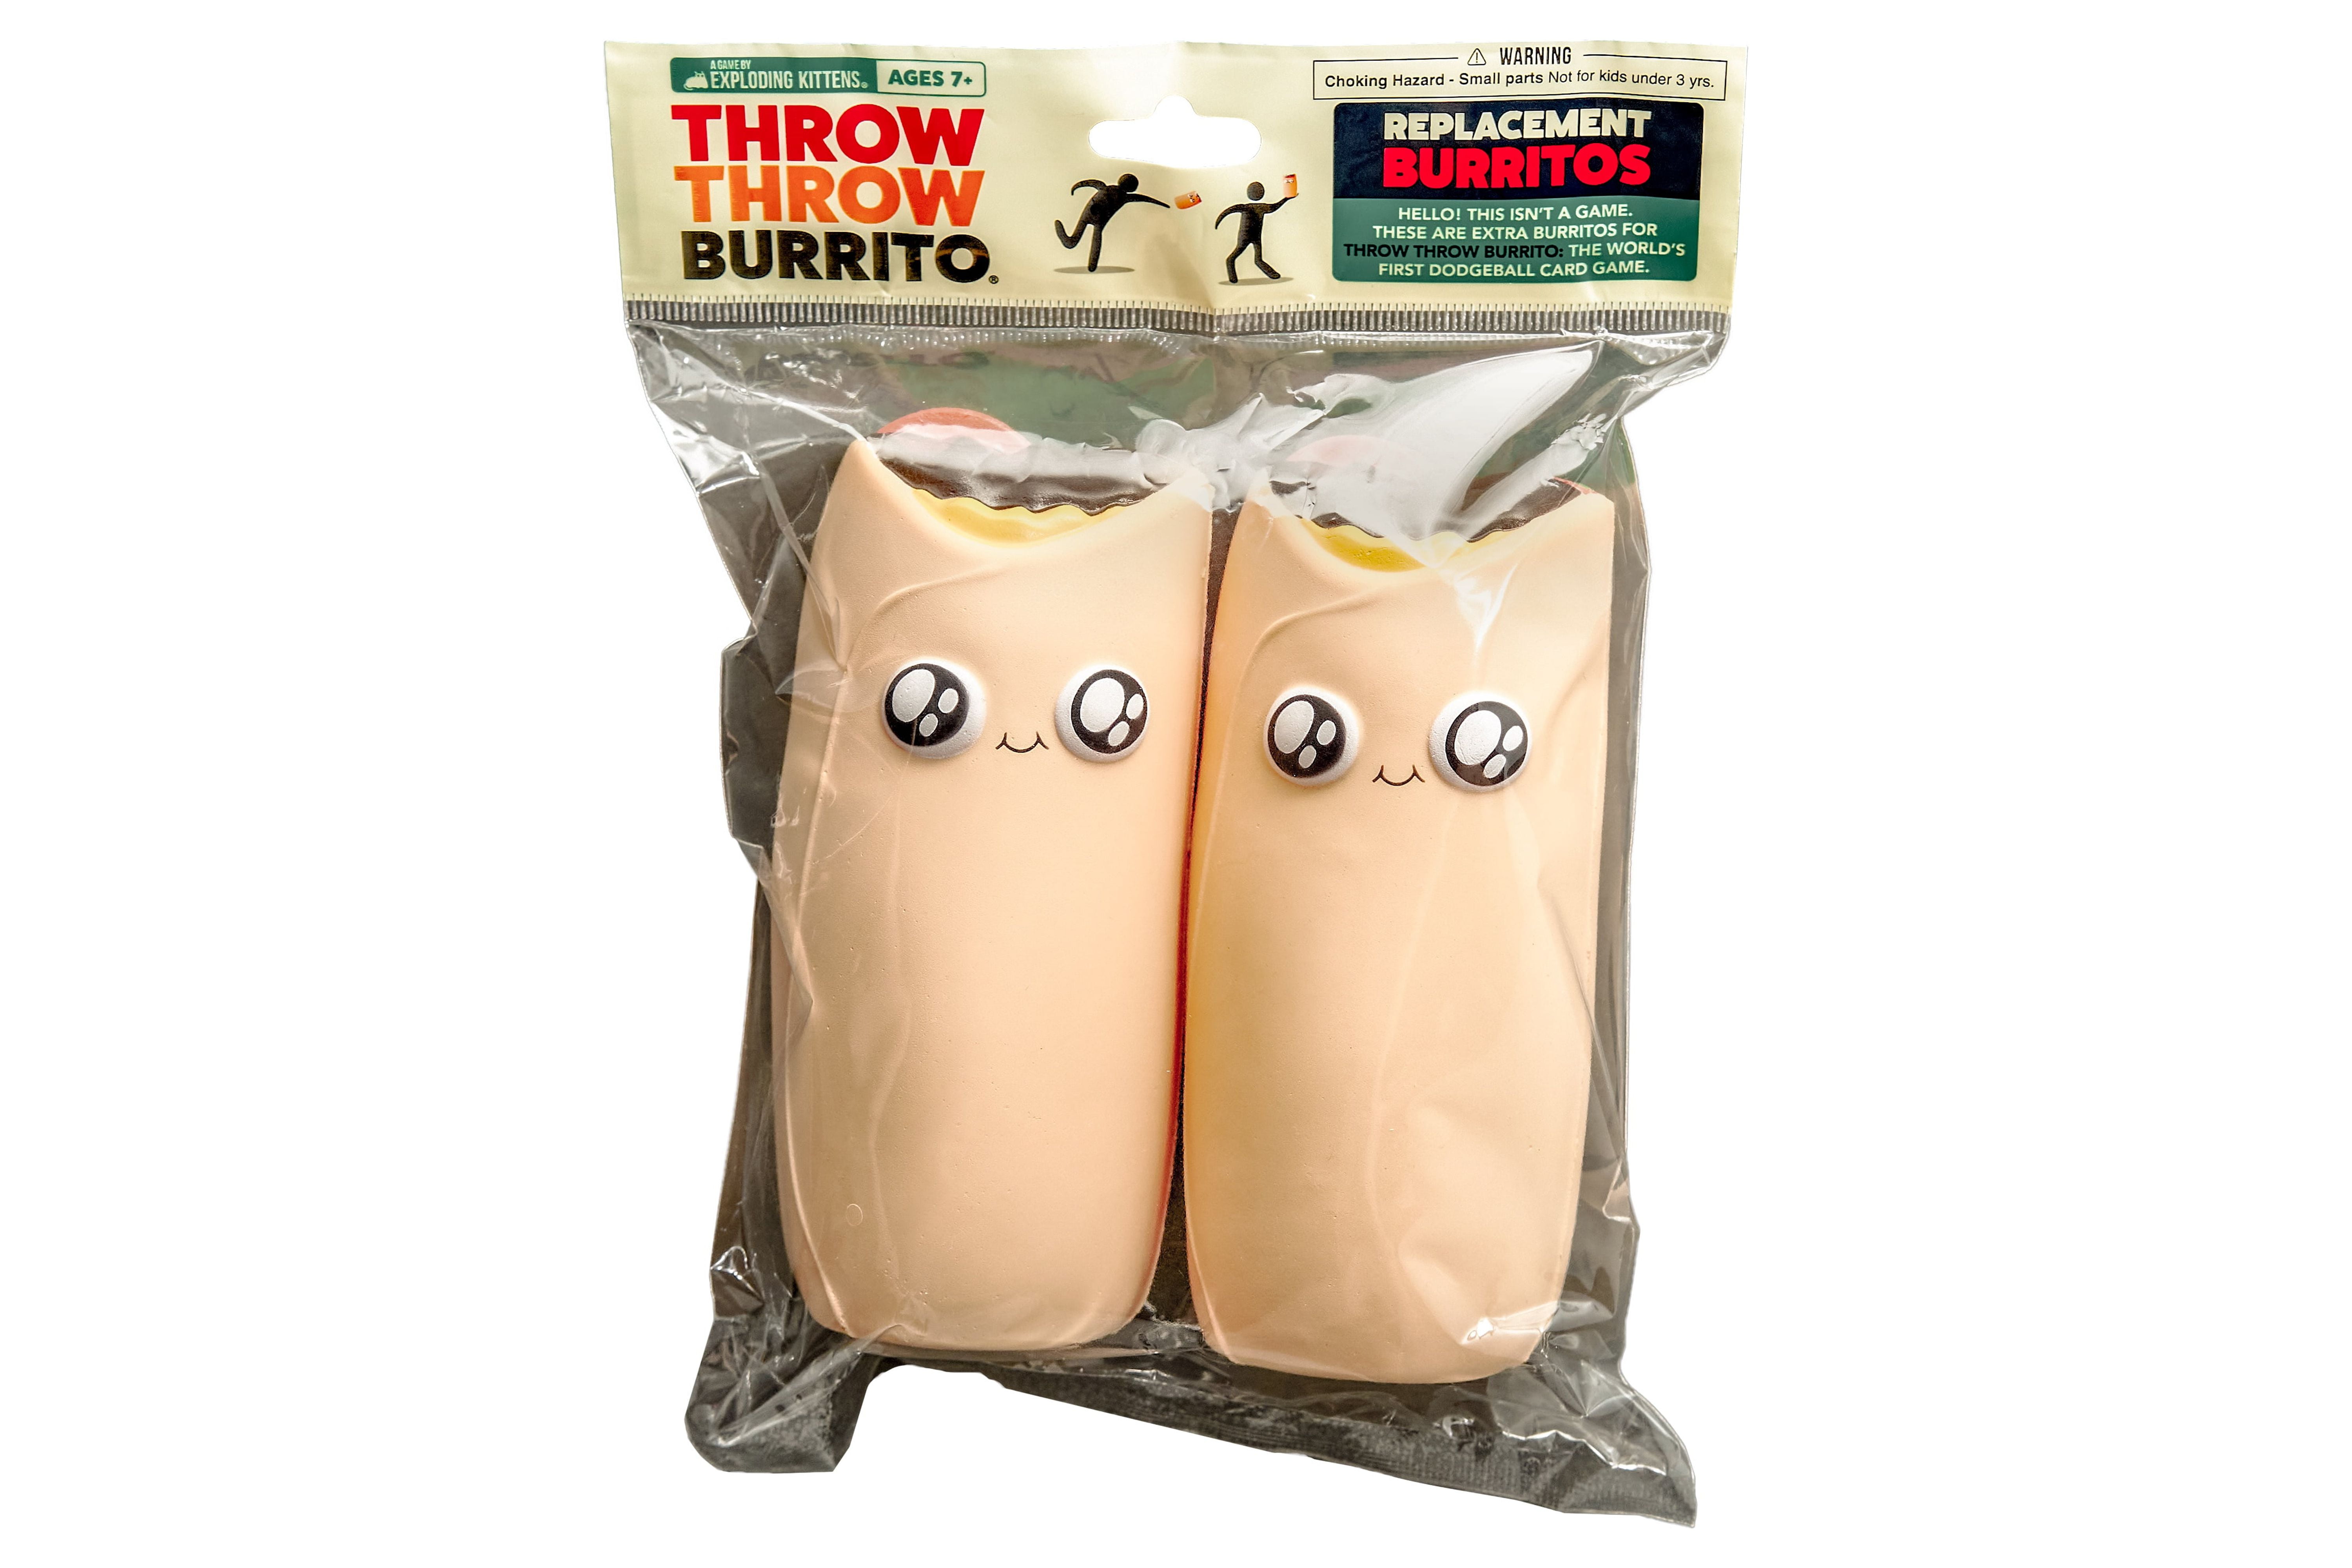 Throw Throw Burrito Official Replacement Burritos for Throw Throw Burrito  Party Game from Exploding Kittens